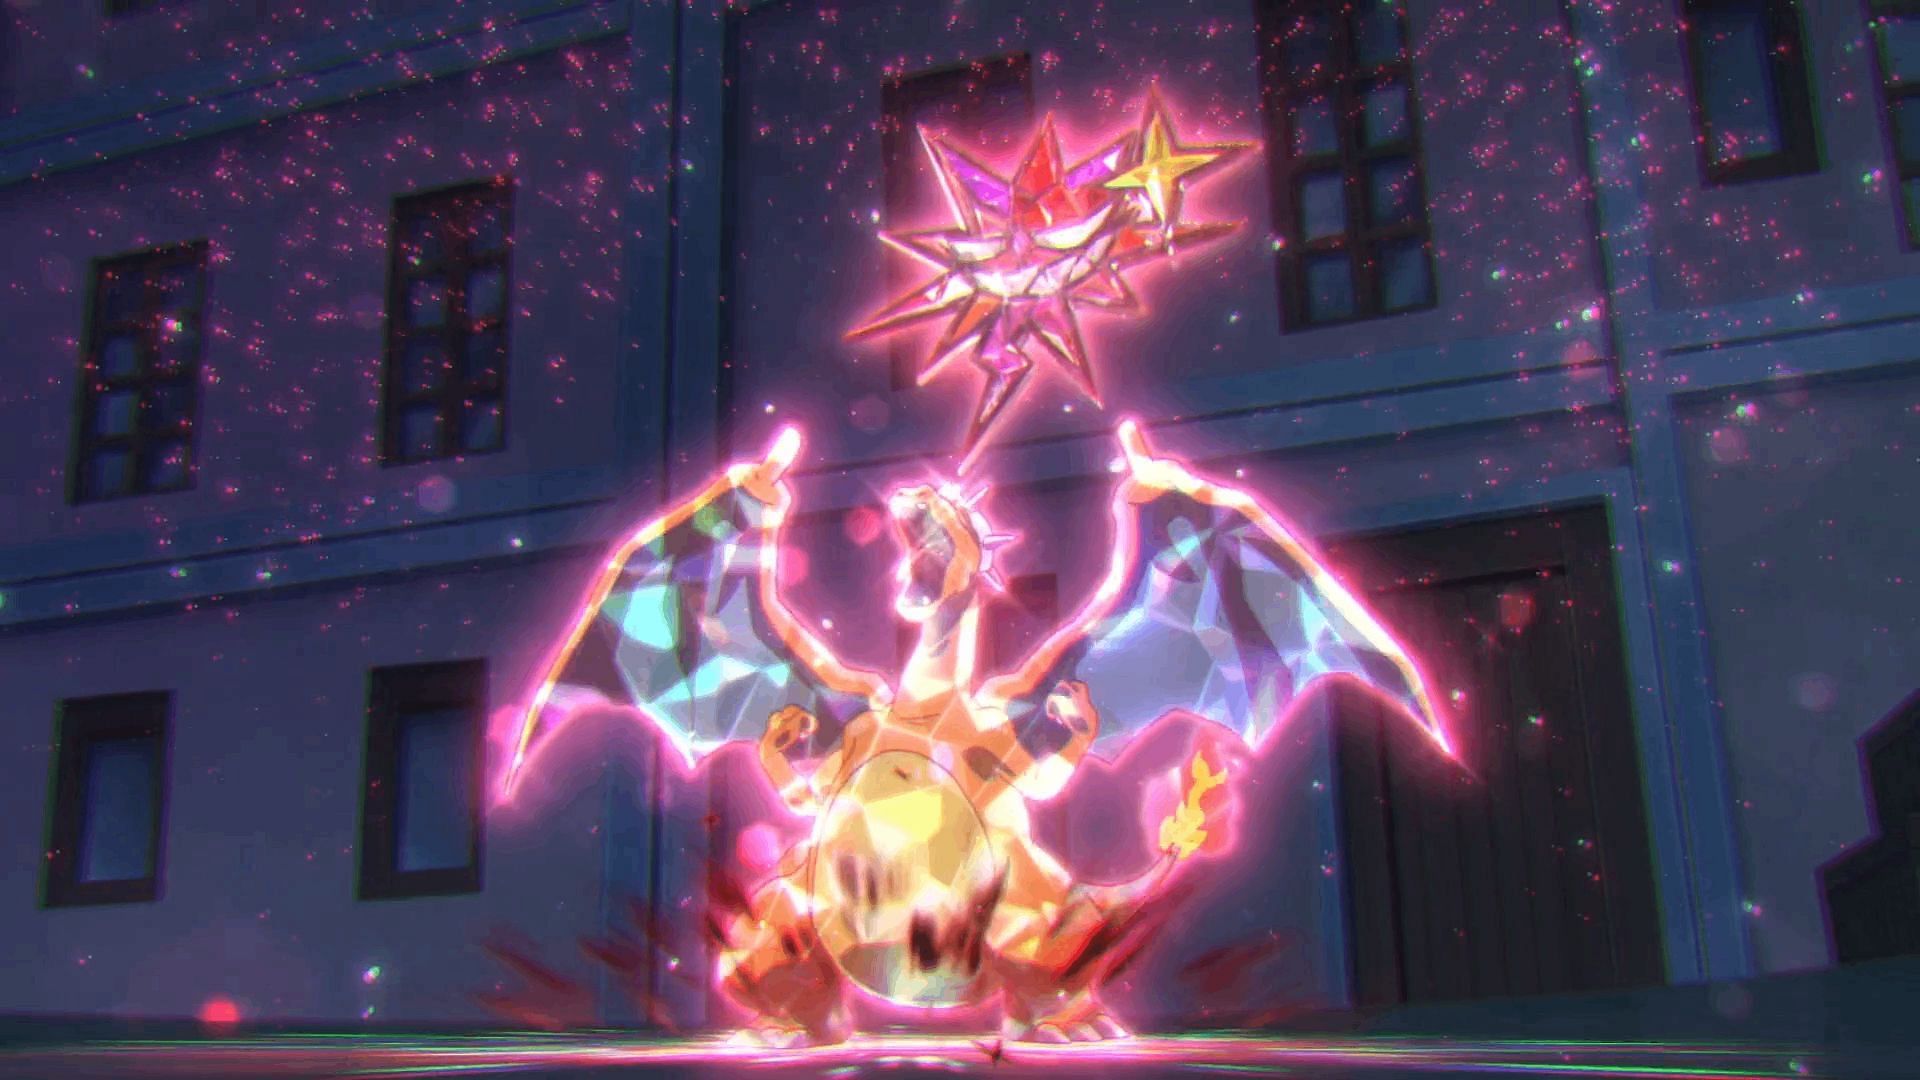 Charizard as seen in the anime